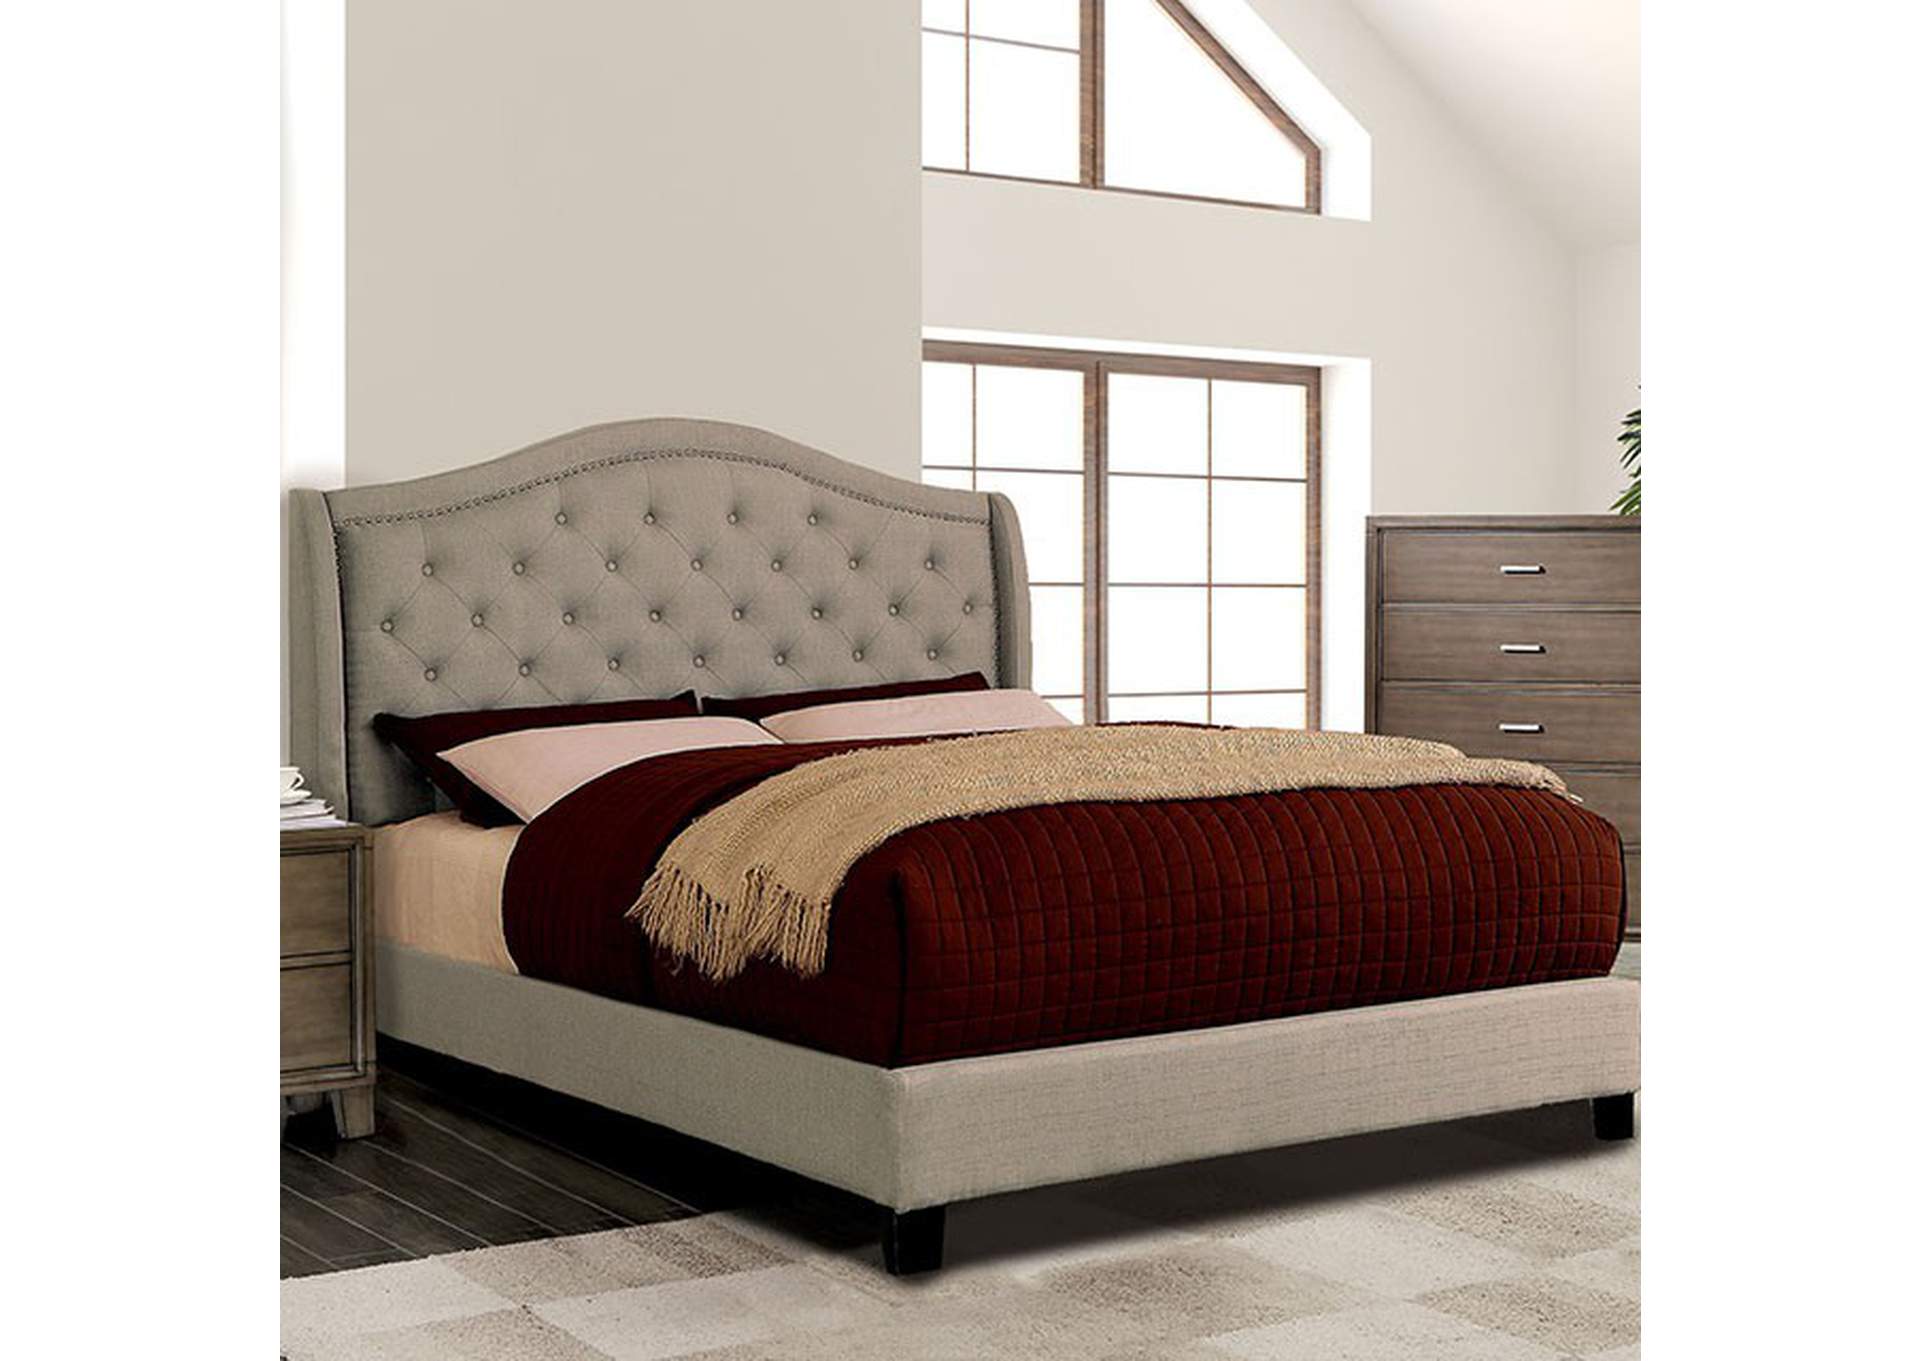 Carly Warm Gray Queen Bed,Furniture of America